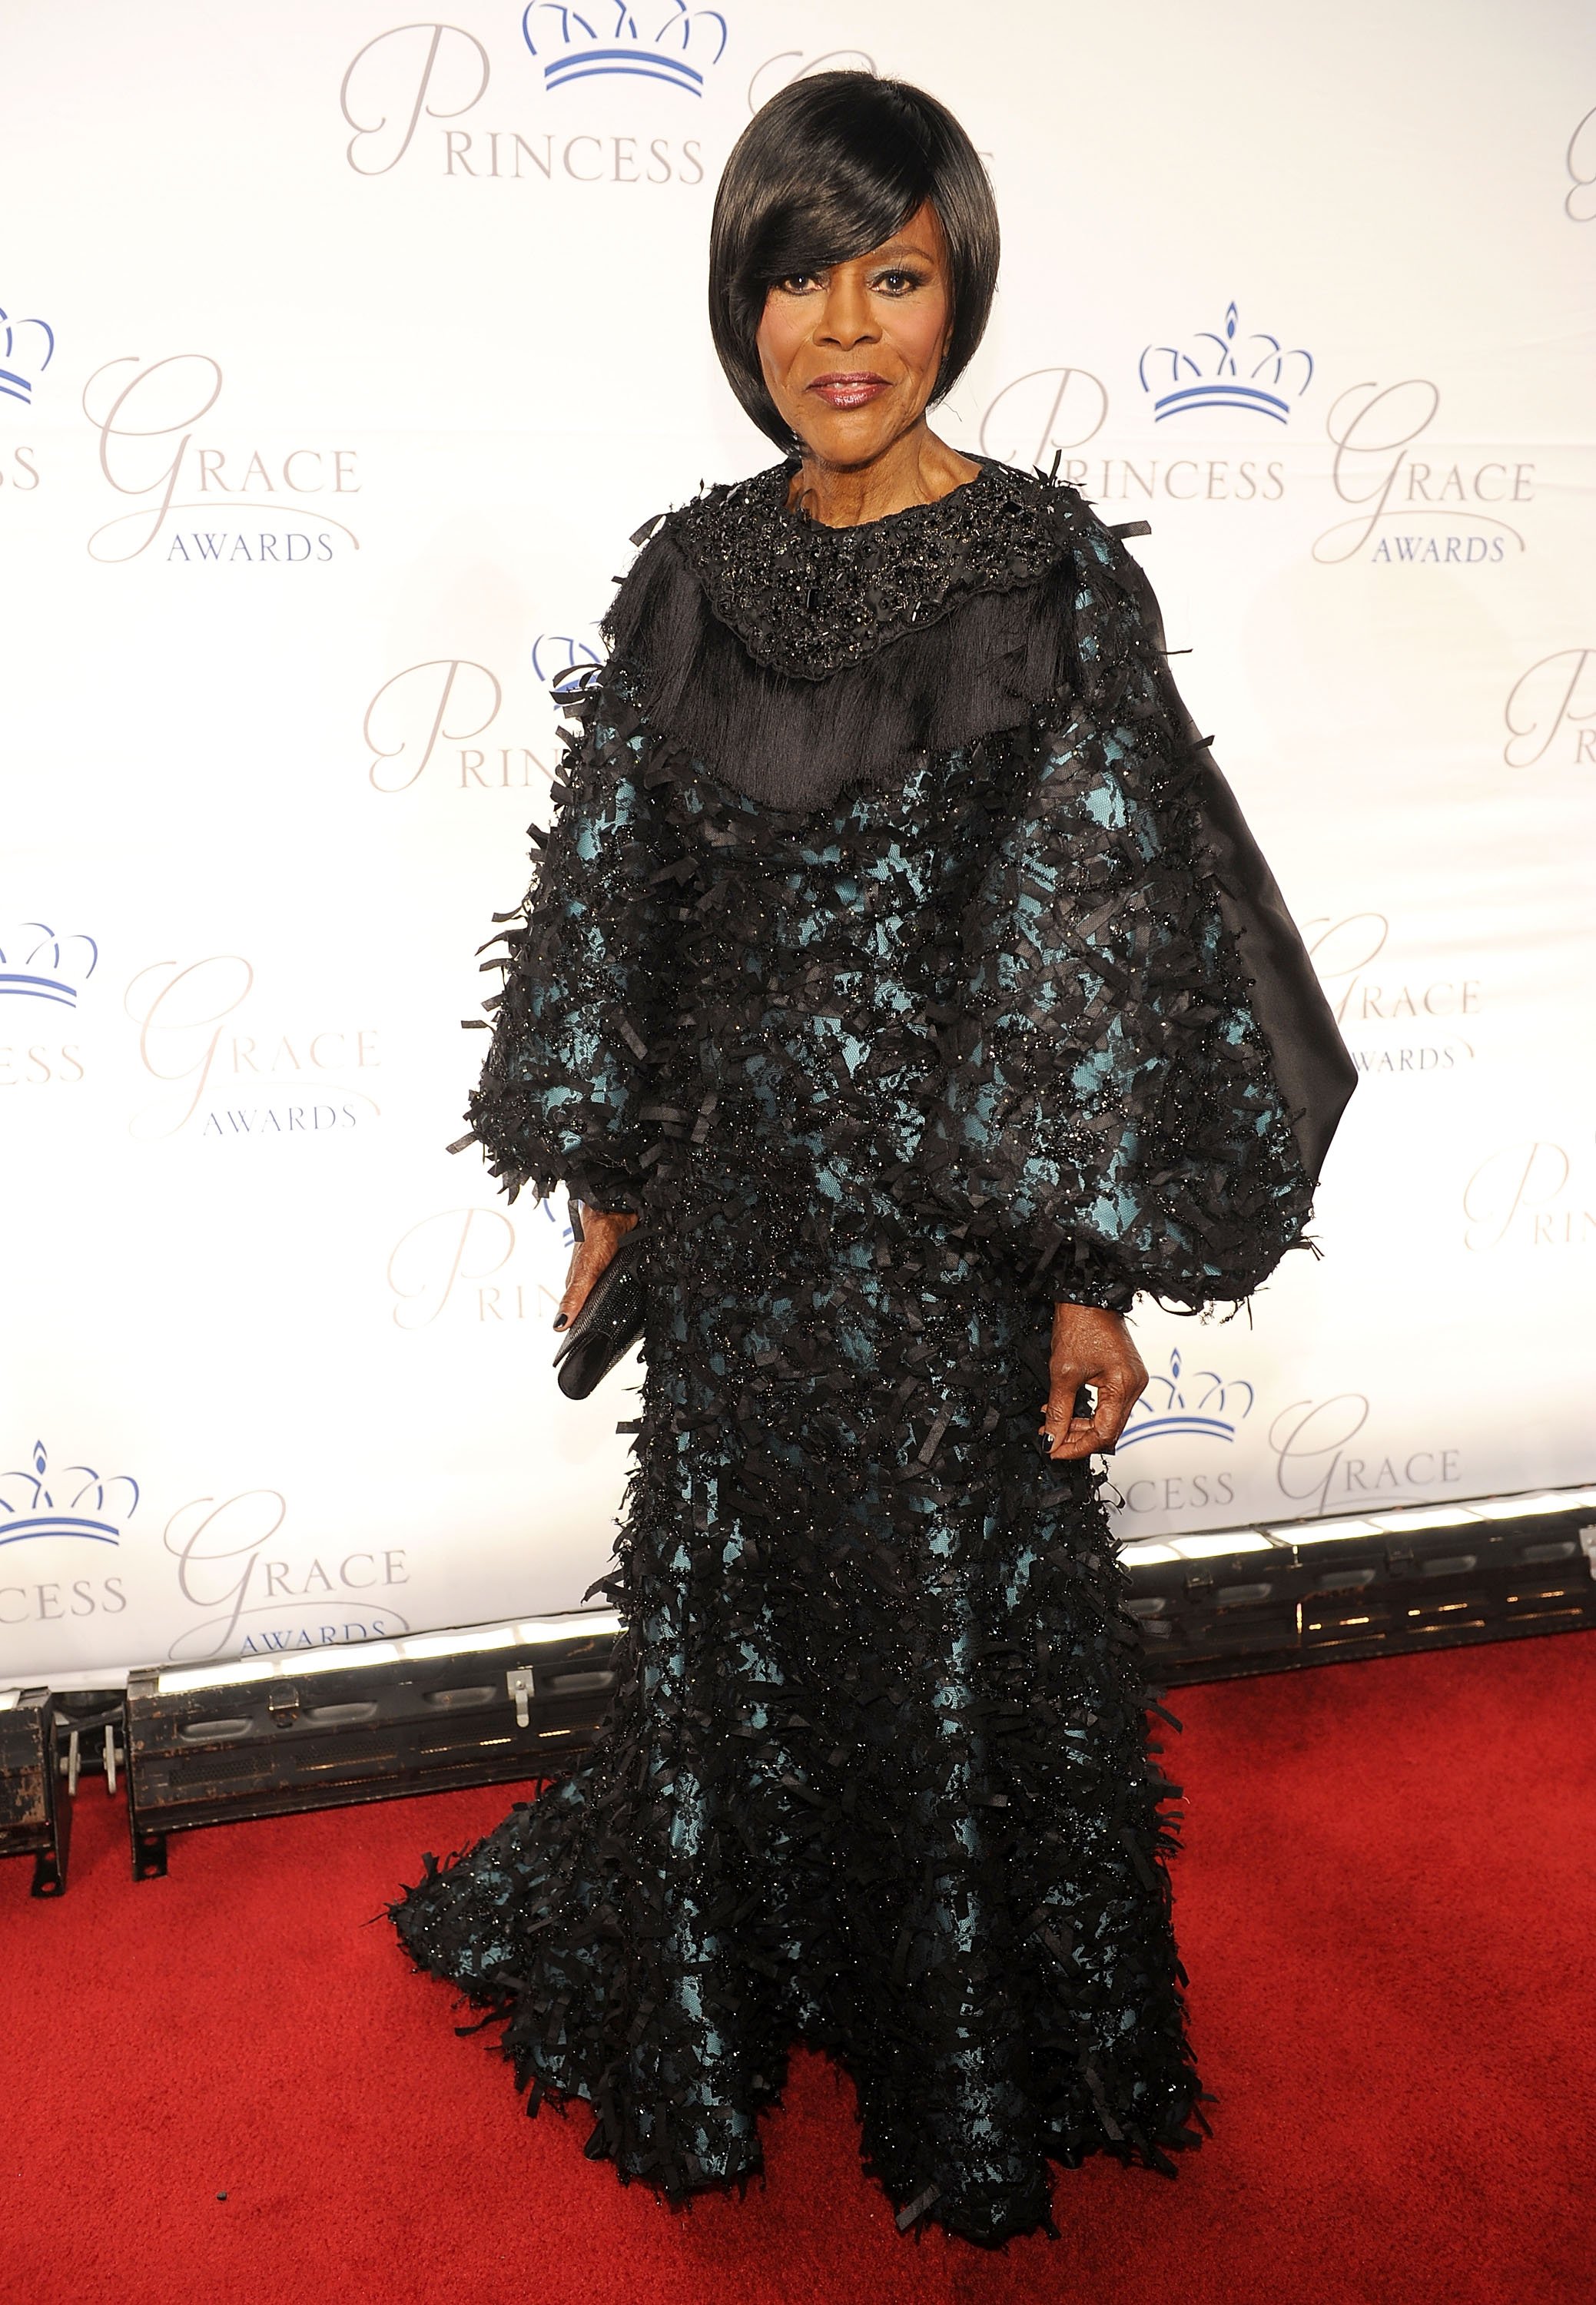 Cicely Tyson at the 2013 Princess Grace Awards Gala at Cipriani 42nd Street on October 30, 2013 in New York City. | Photo: Getty Images